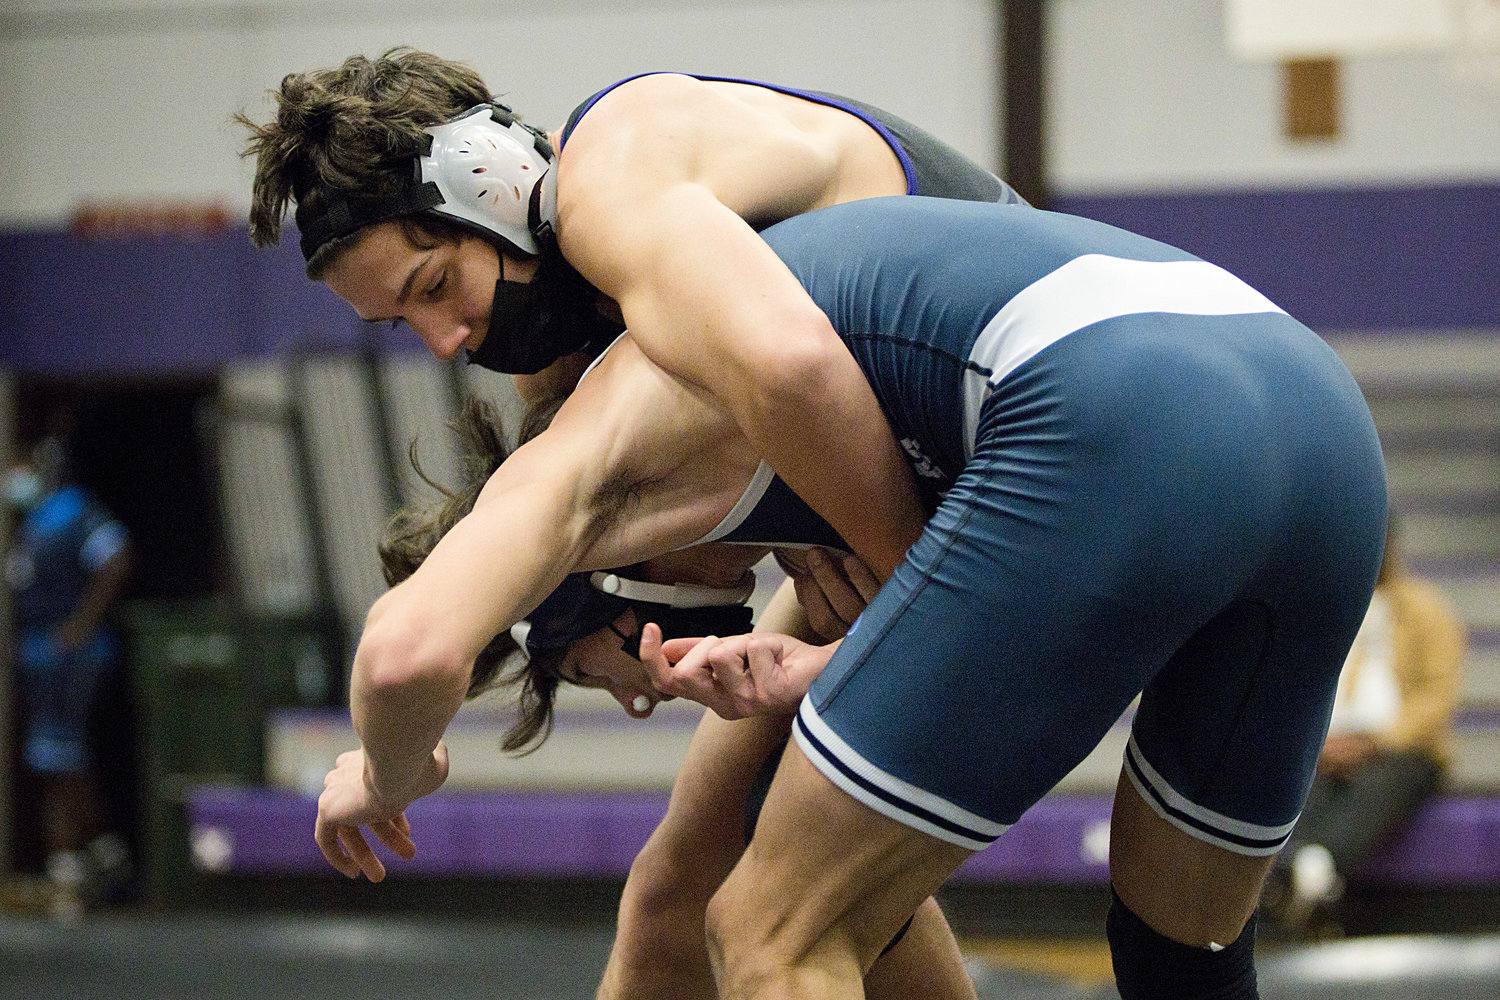 Mason Furtado controls his opponent while competing in the 132
lb. weight class, against Needham, Saturday.